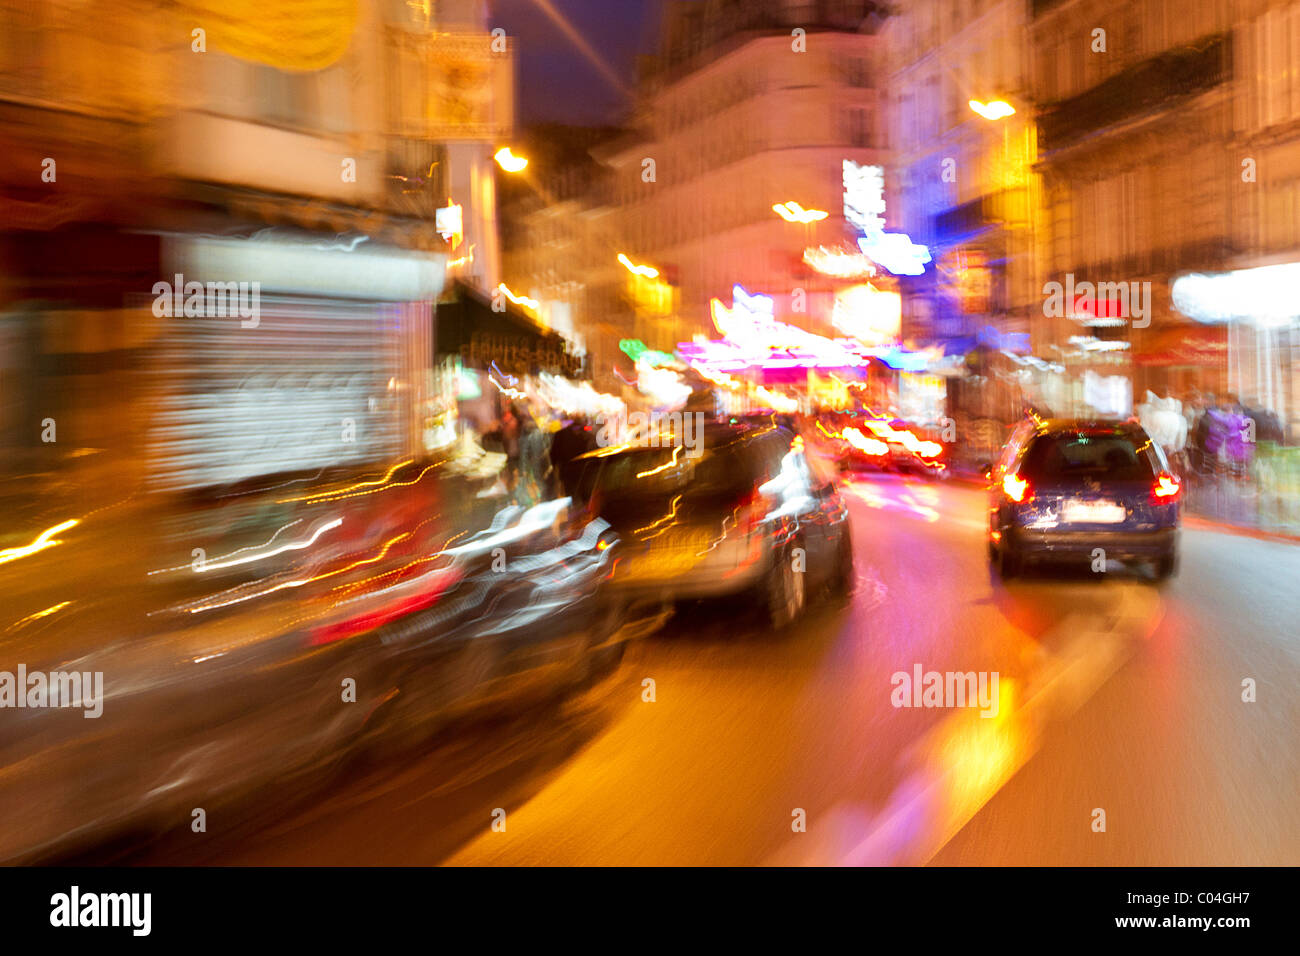 Paris Blurred Moving Cars In A City Street Stock Photo